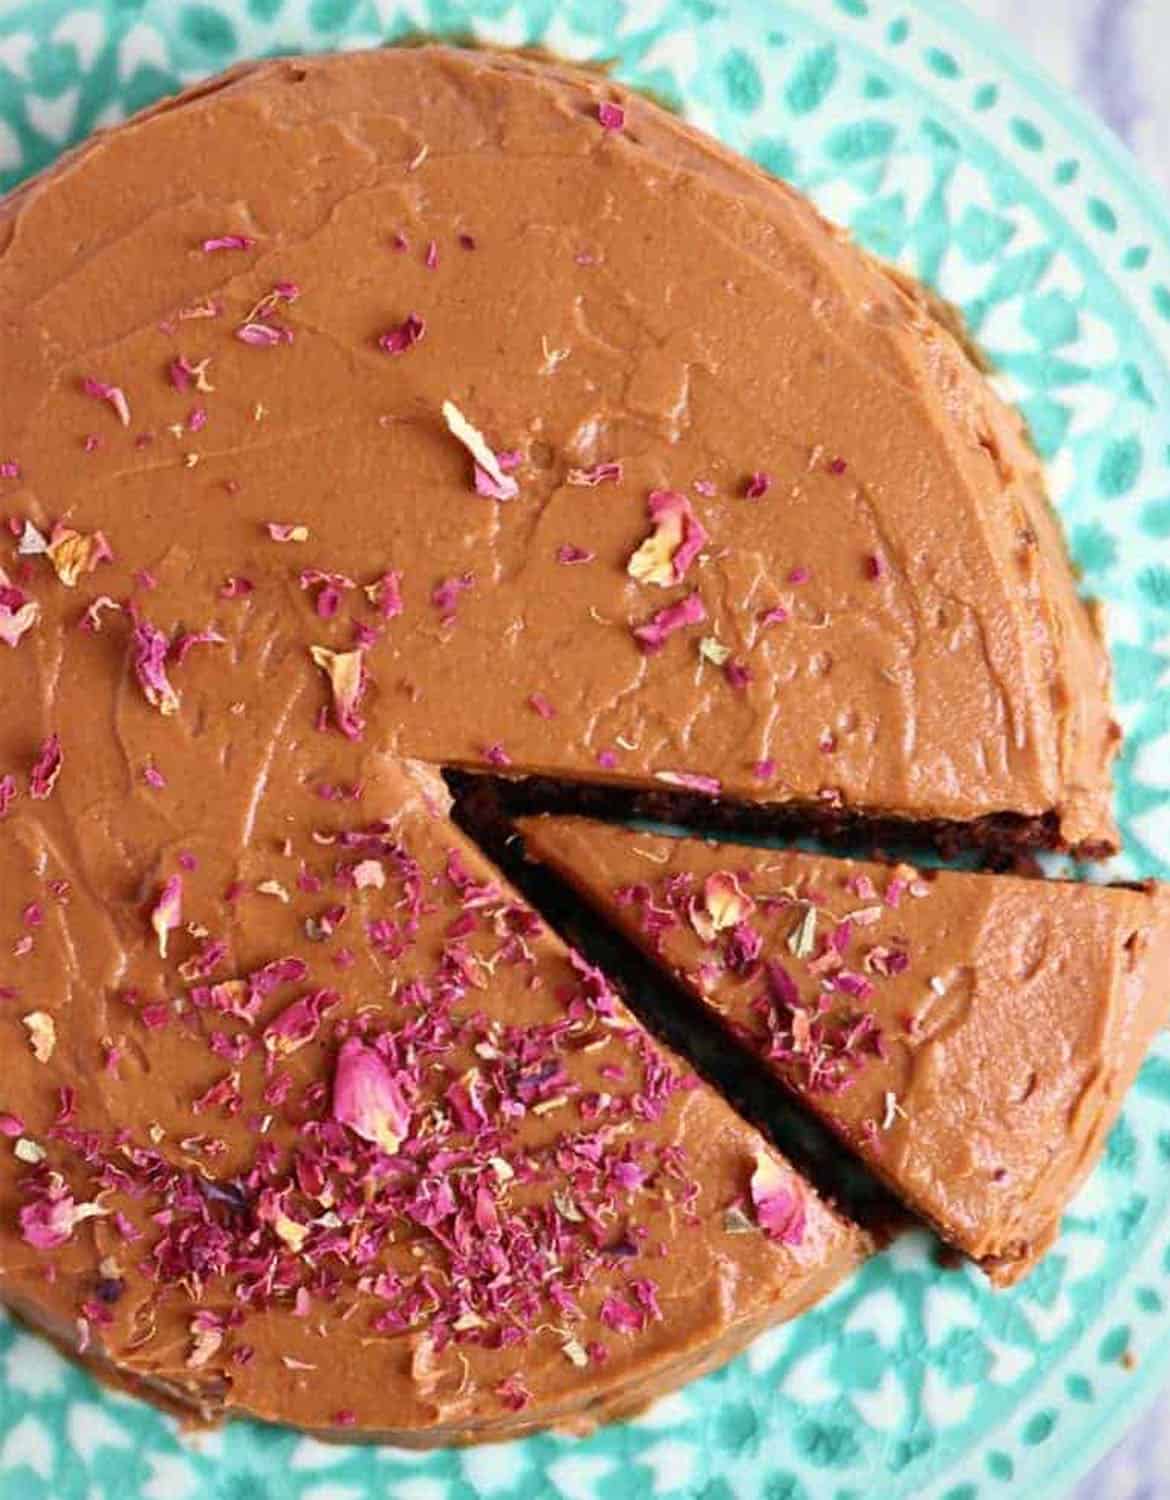 A round chocolate cake with some rose petals on top over a light green plate - Rhian's Recipes